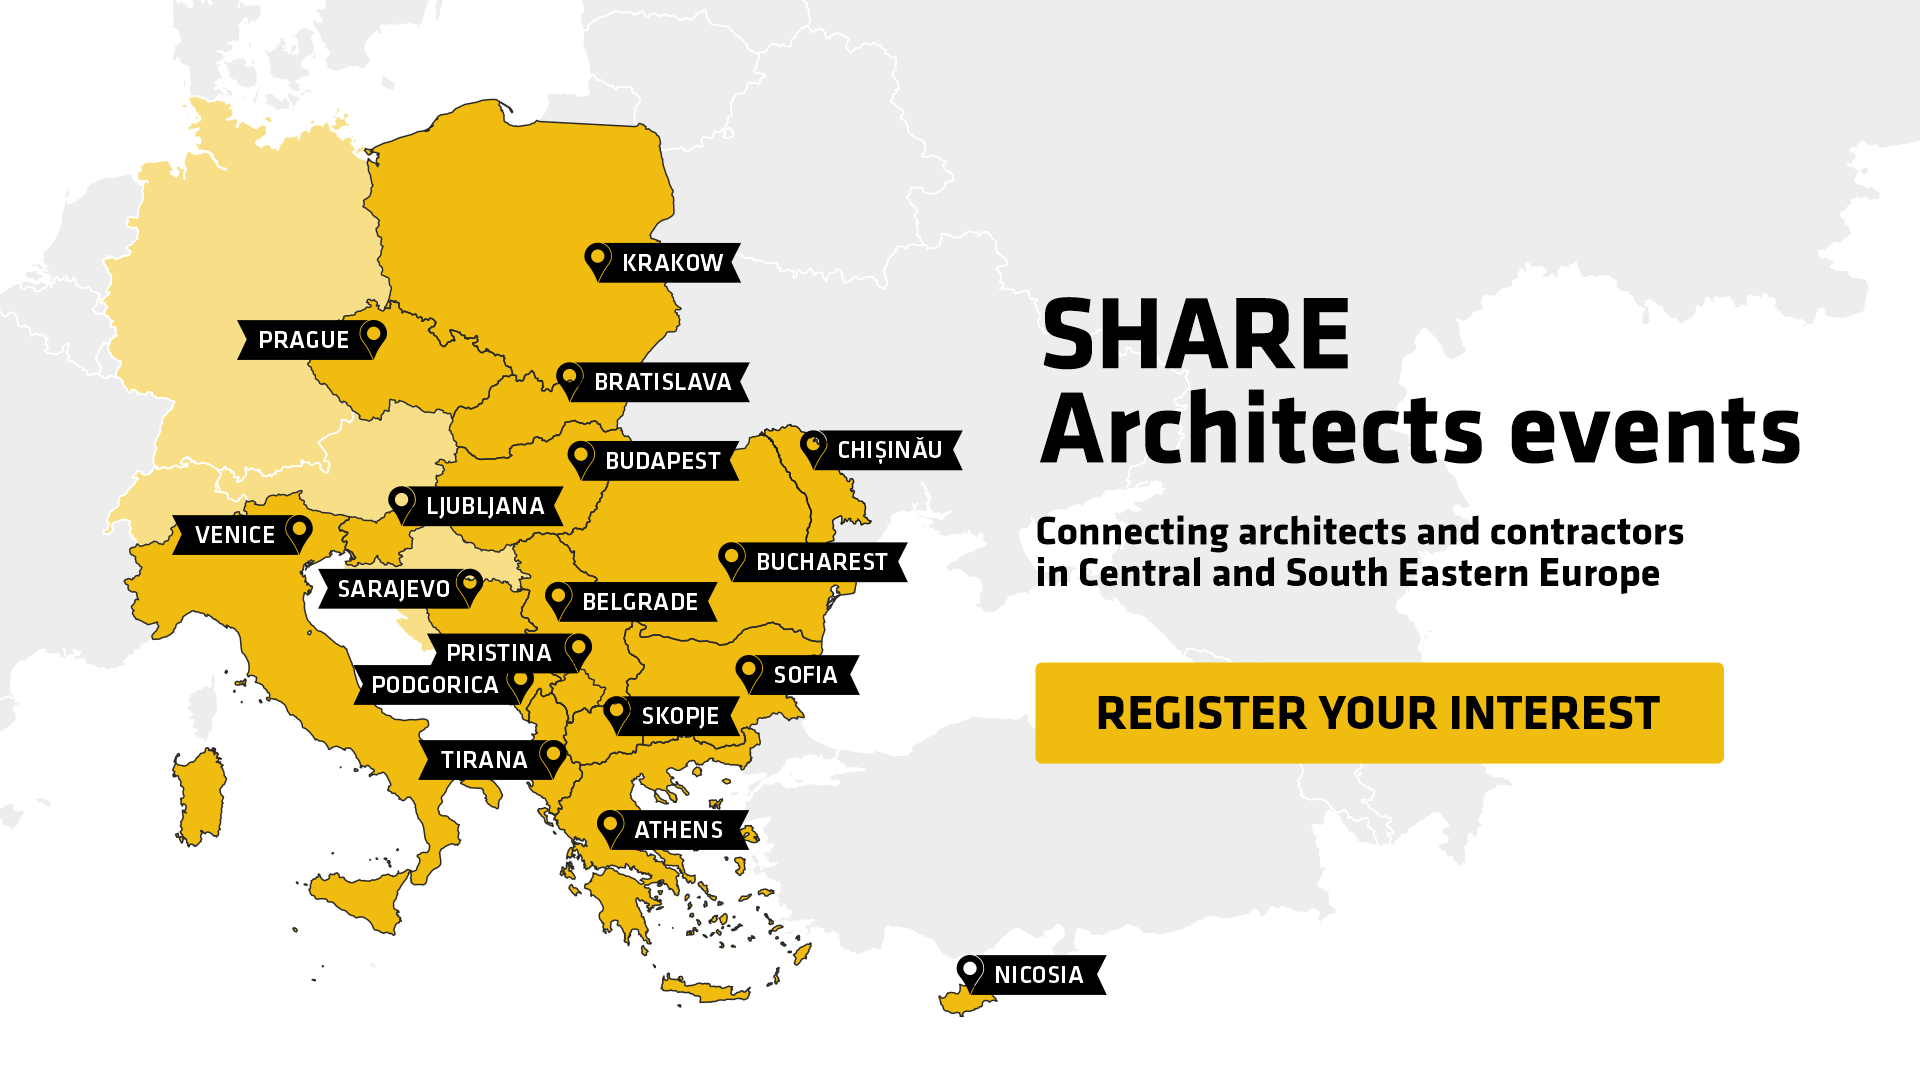 SHARE Architects Events